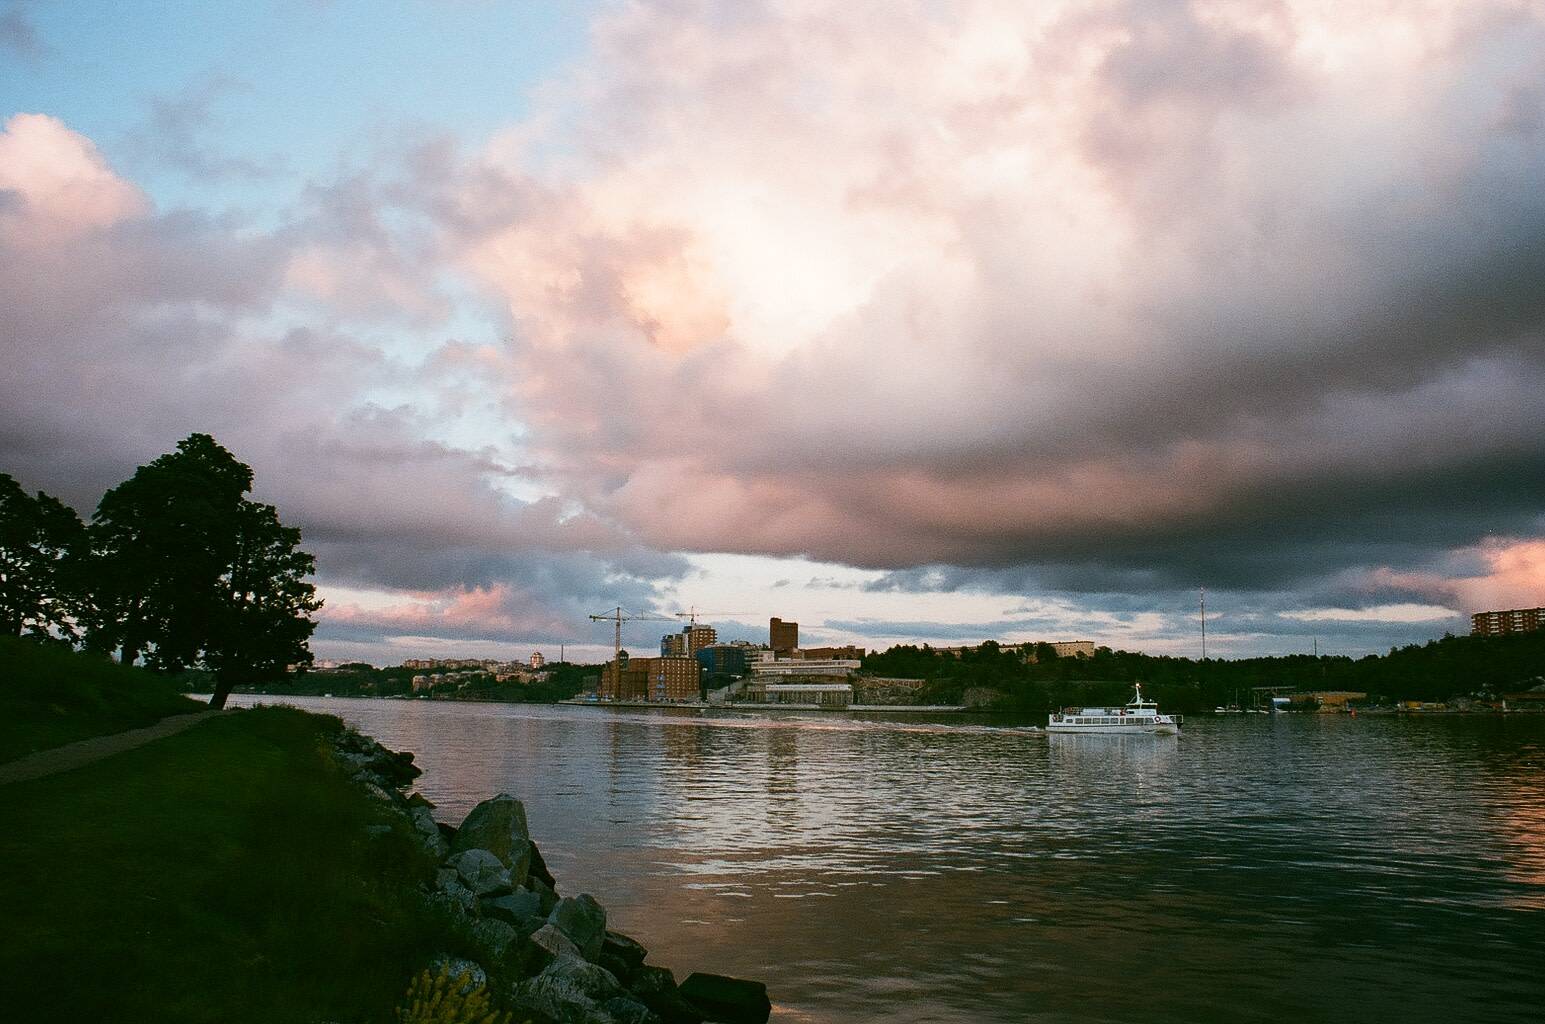 view of the landscape and urban area around a small bay that a ferry is arriving where the sky is covered with enormous clouds with pink hues